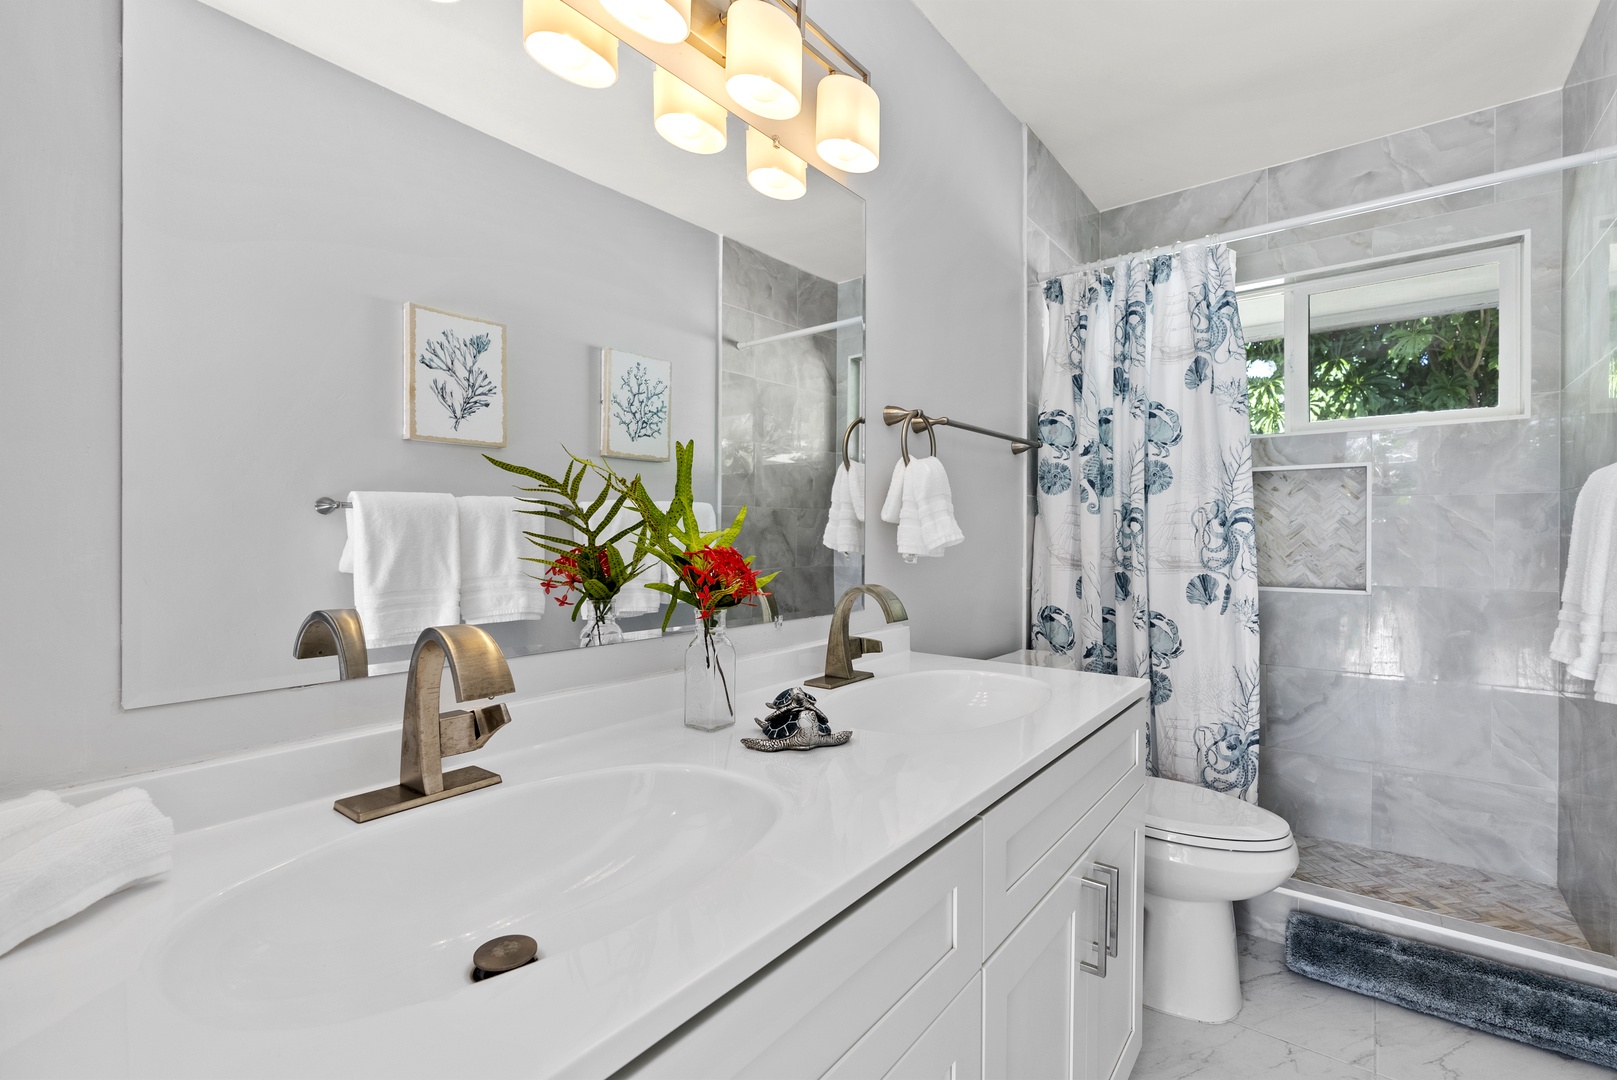 Kailua Vacation Rentals, Hale Aloha - Communal bathroom with dual sink and a walk-in shower